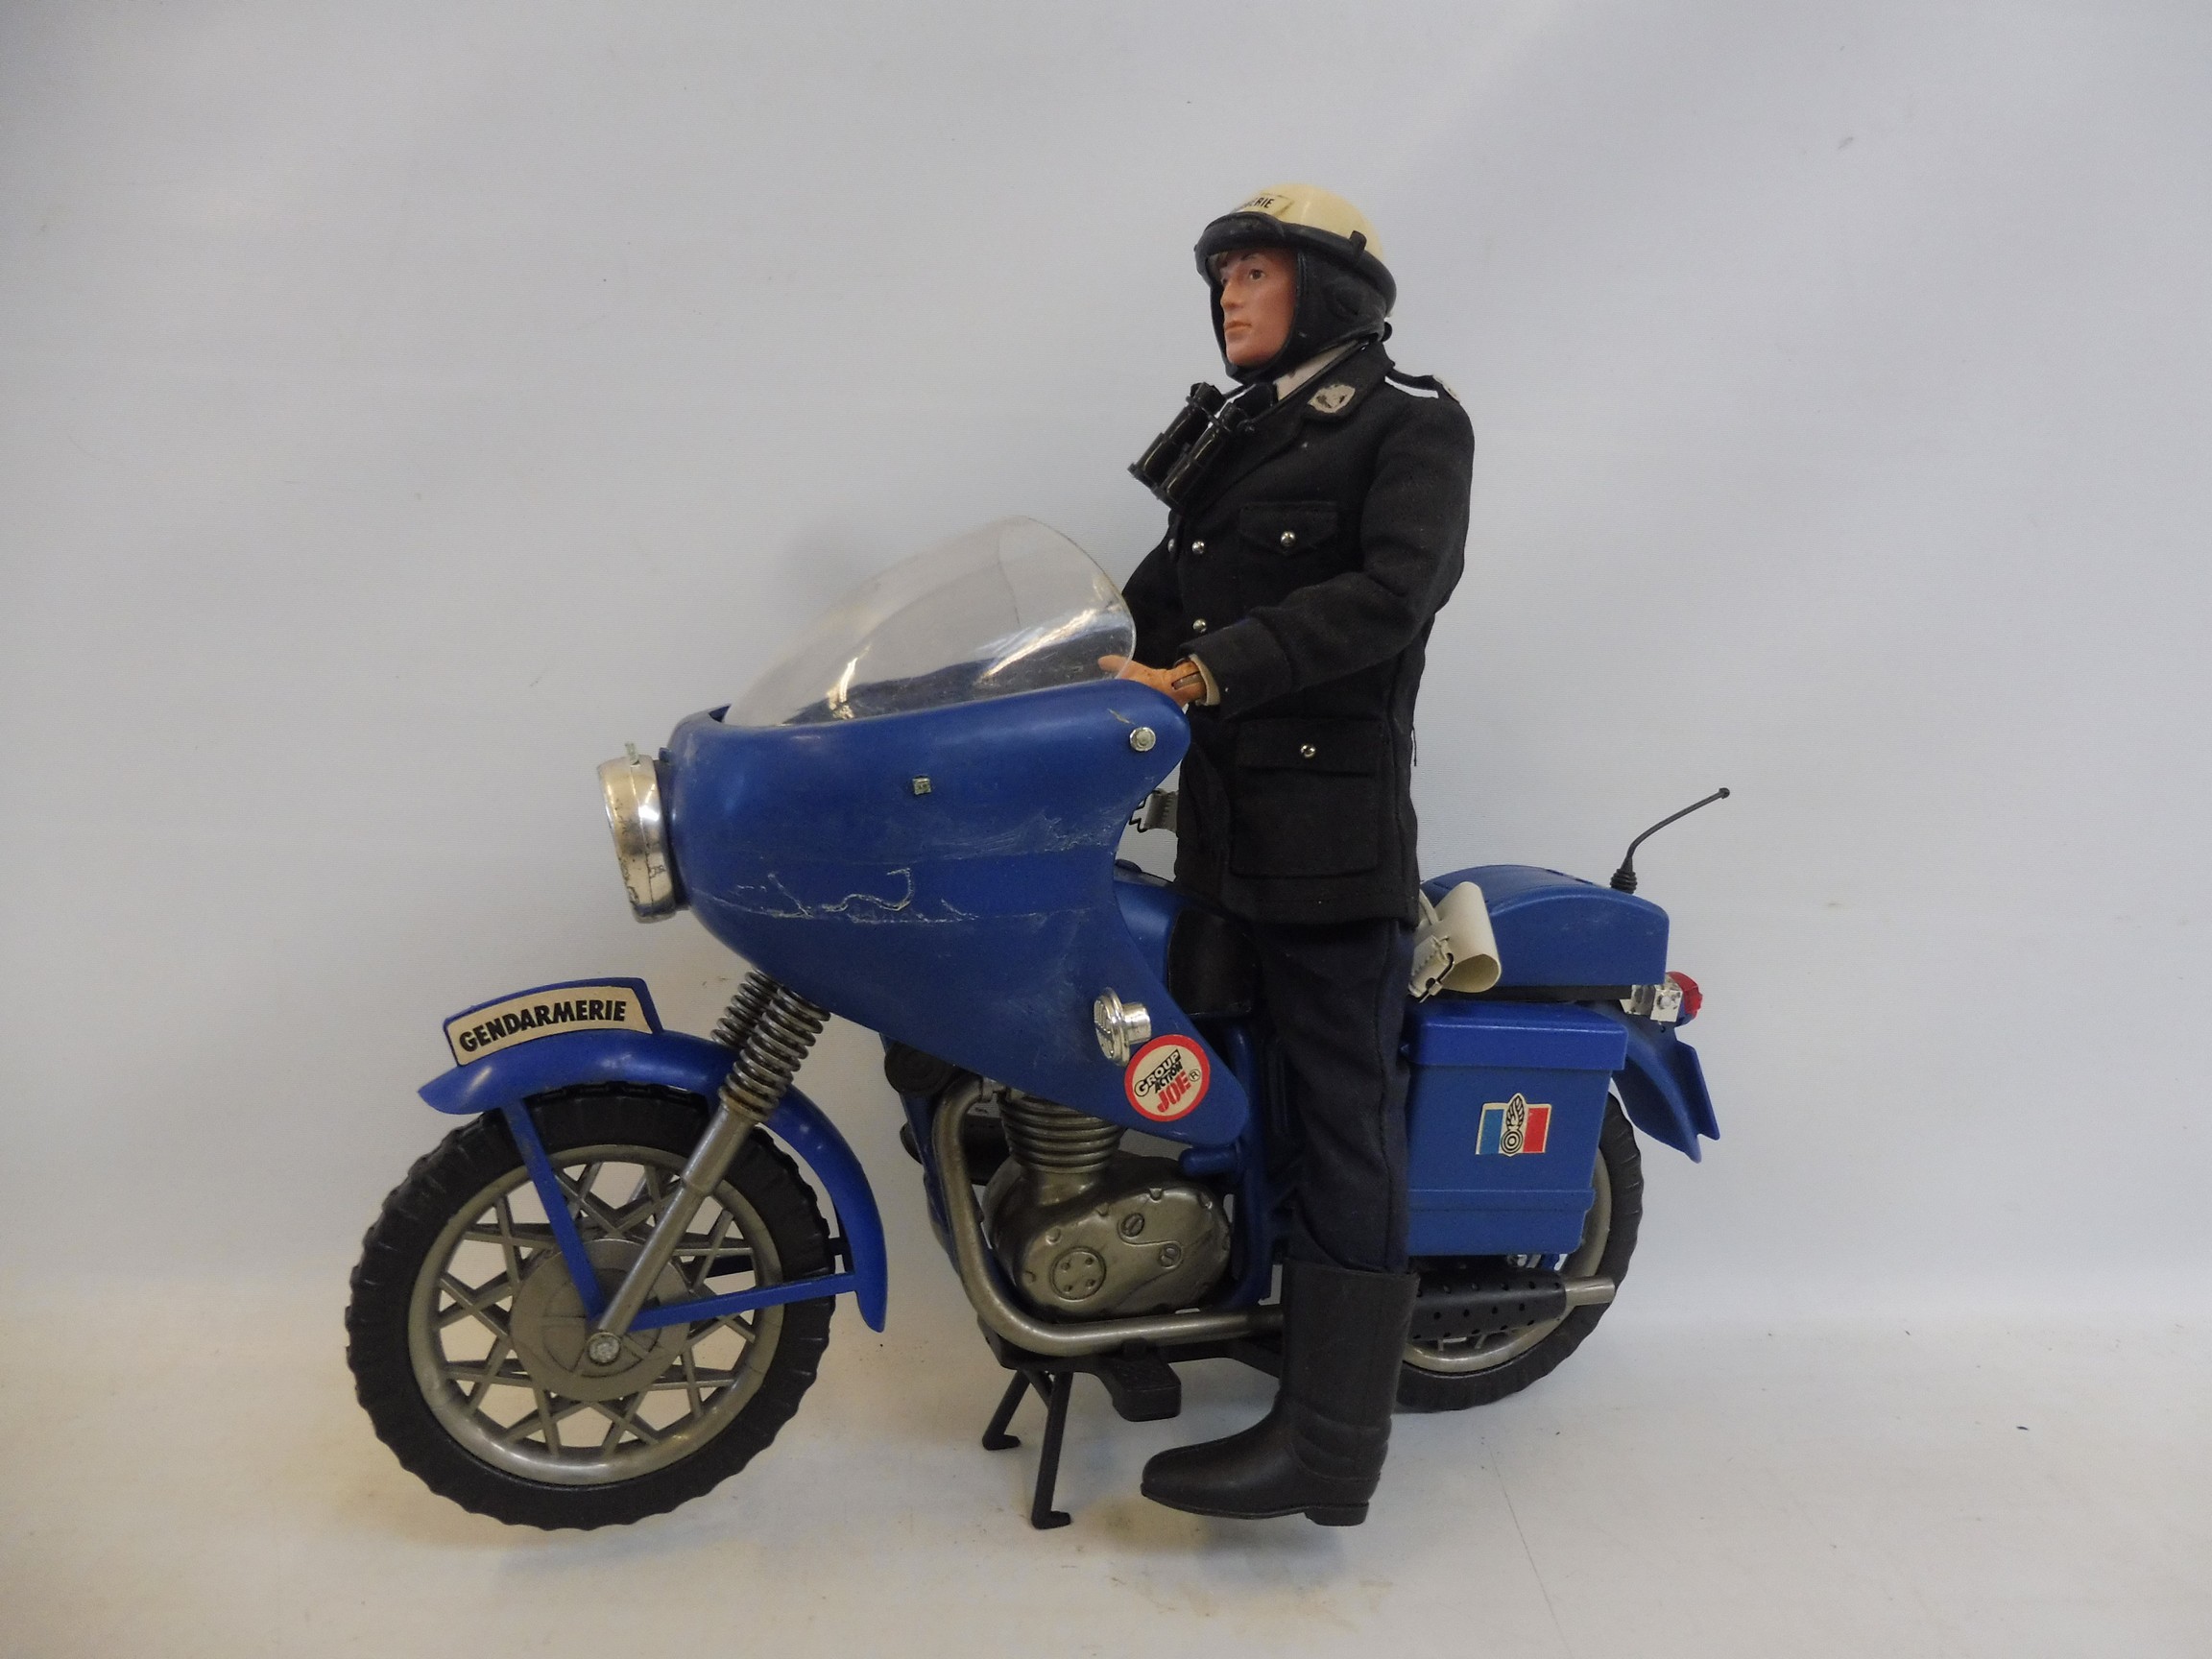 A rare Action Joe Gendarmerie motorbike and figure, complete with accessories.